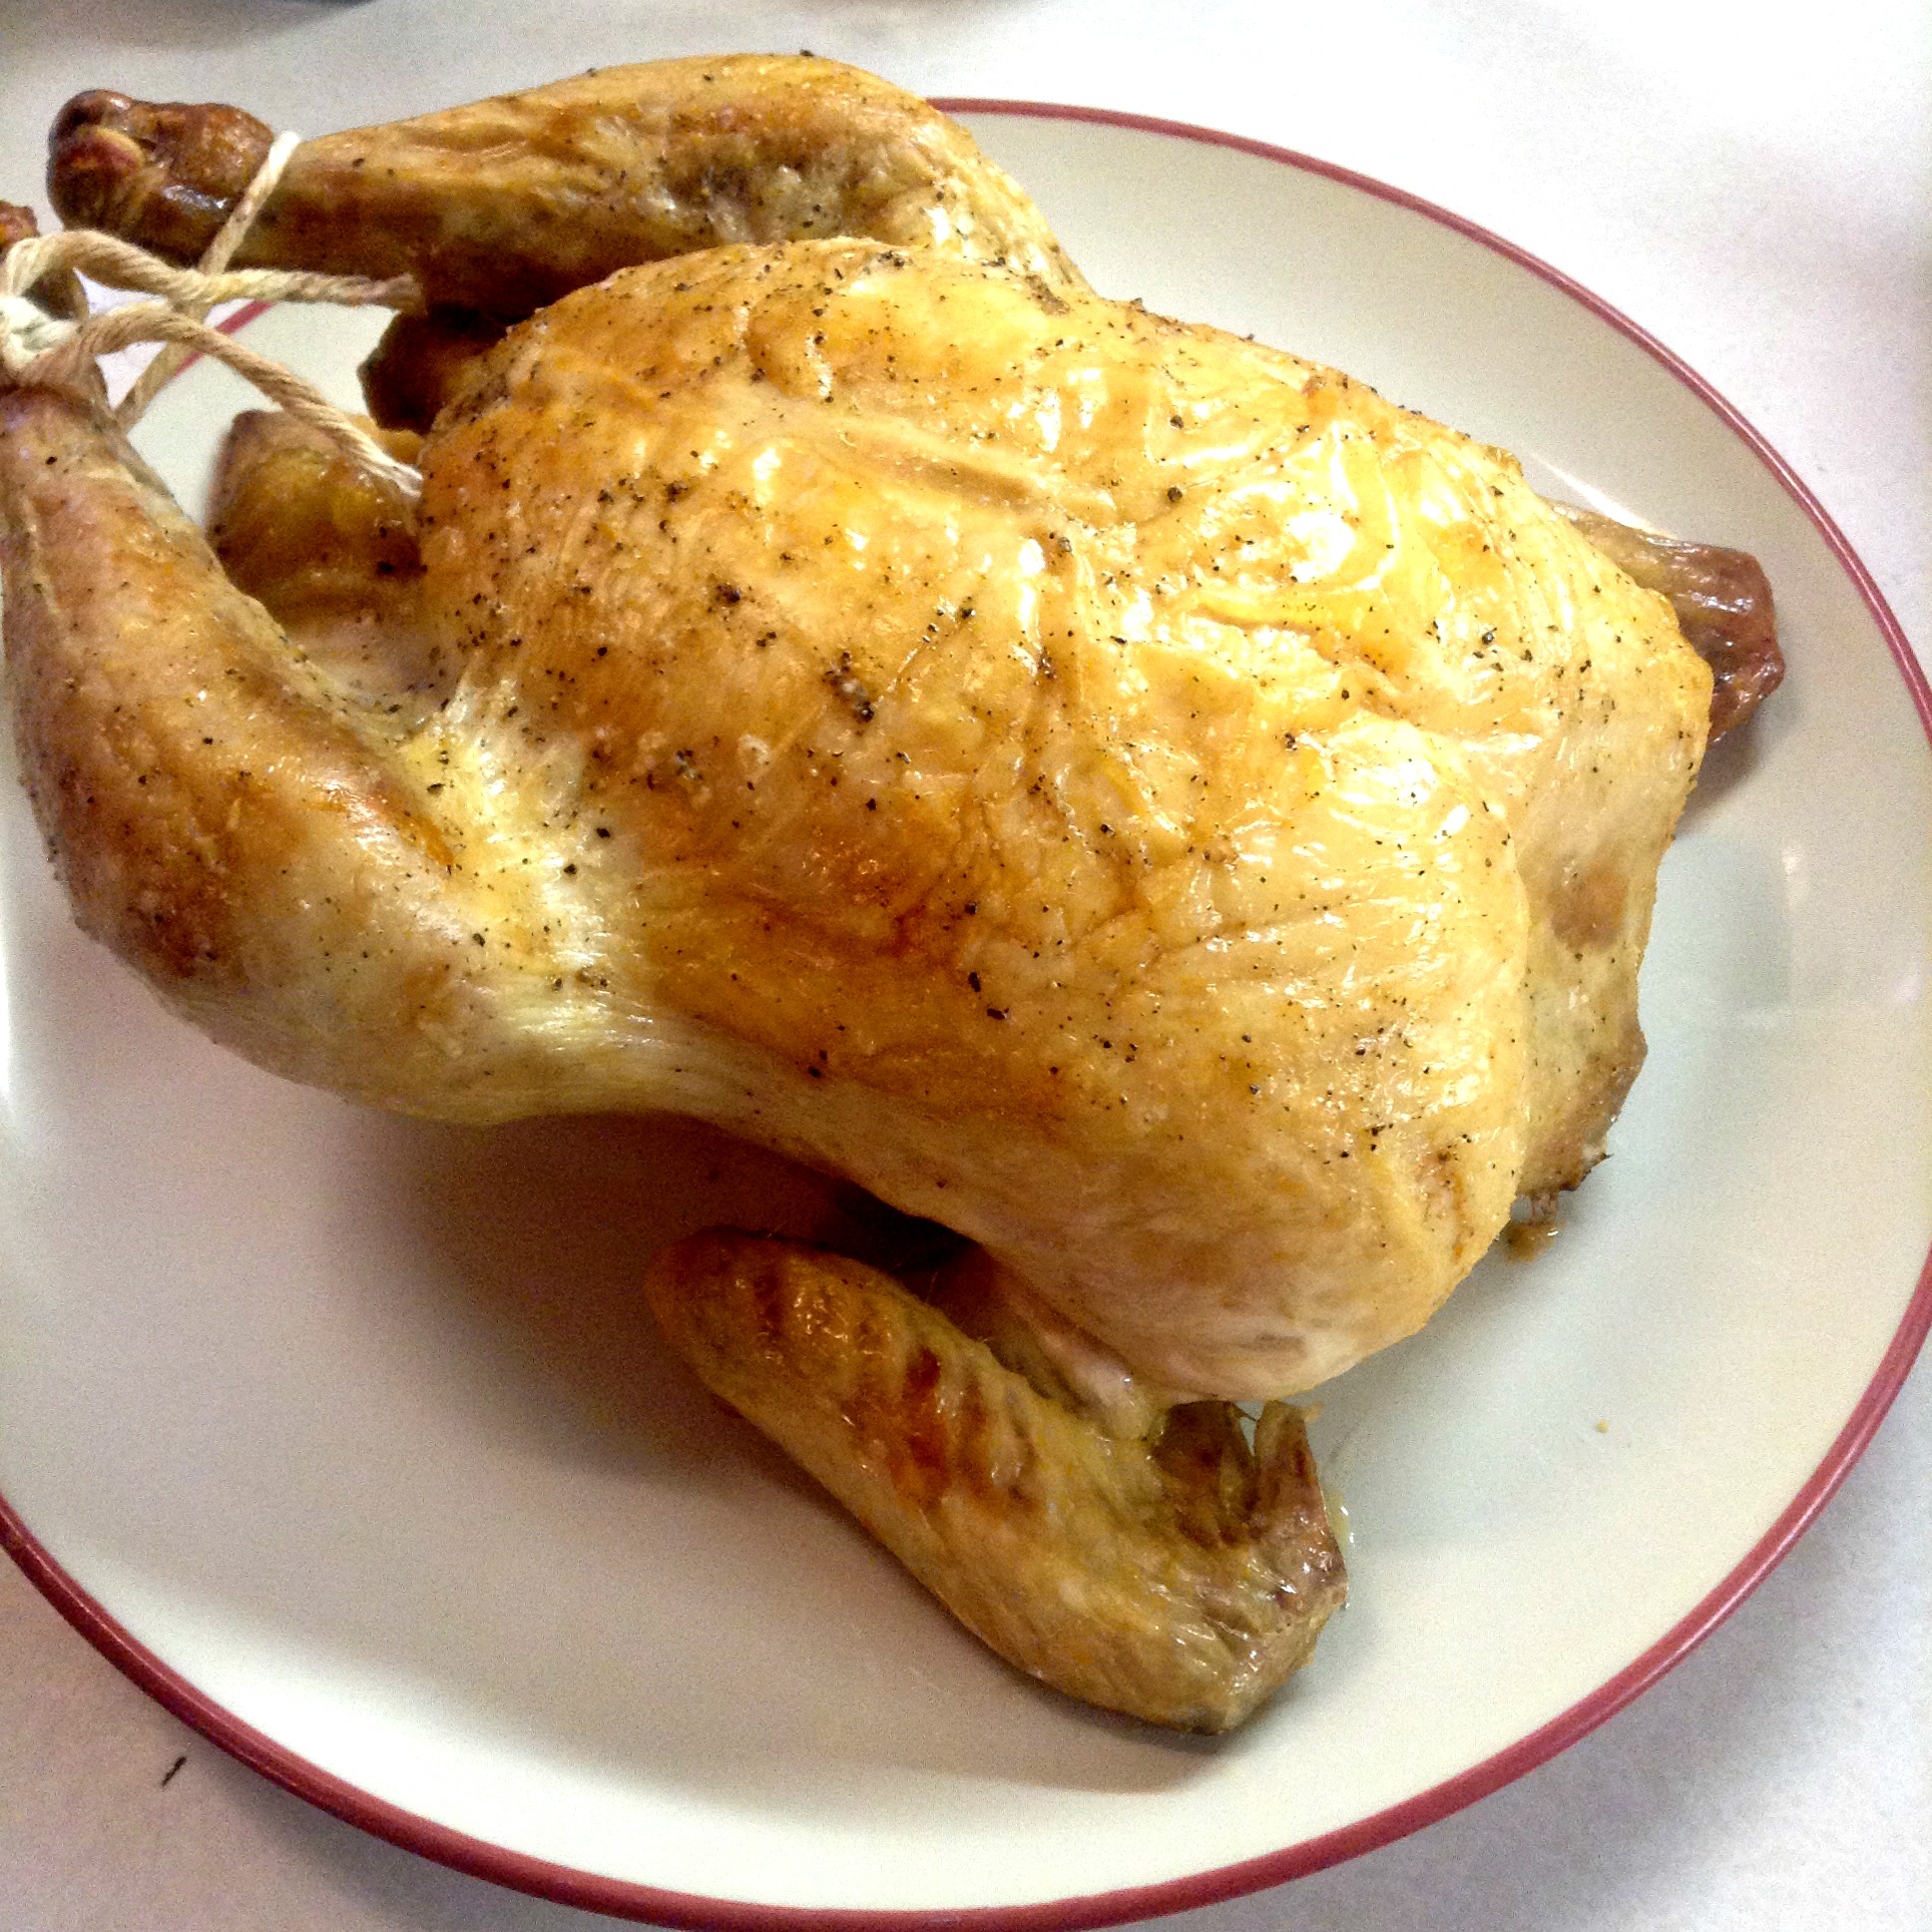 Roast A Whole Chicken and Save Time & Money in the Kitchen